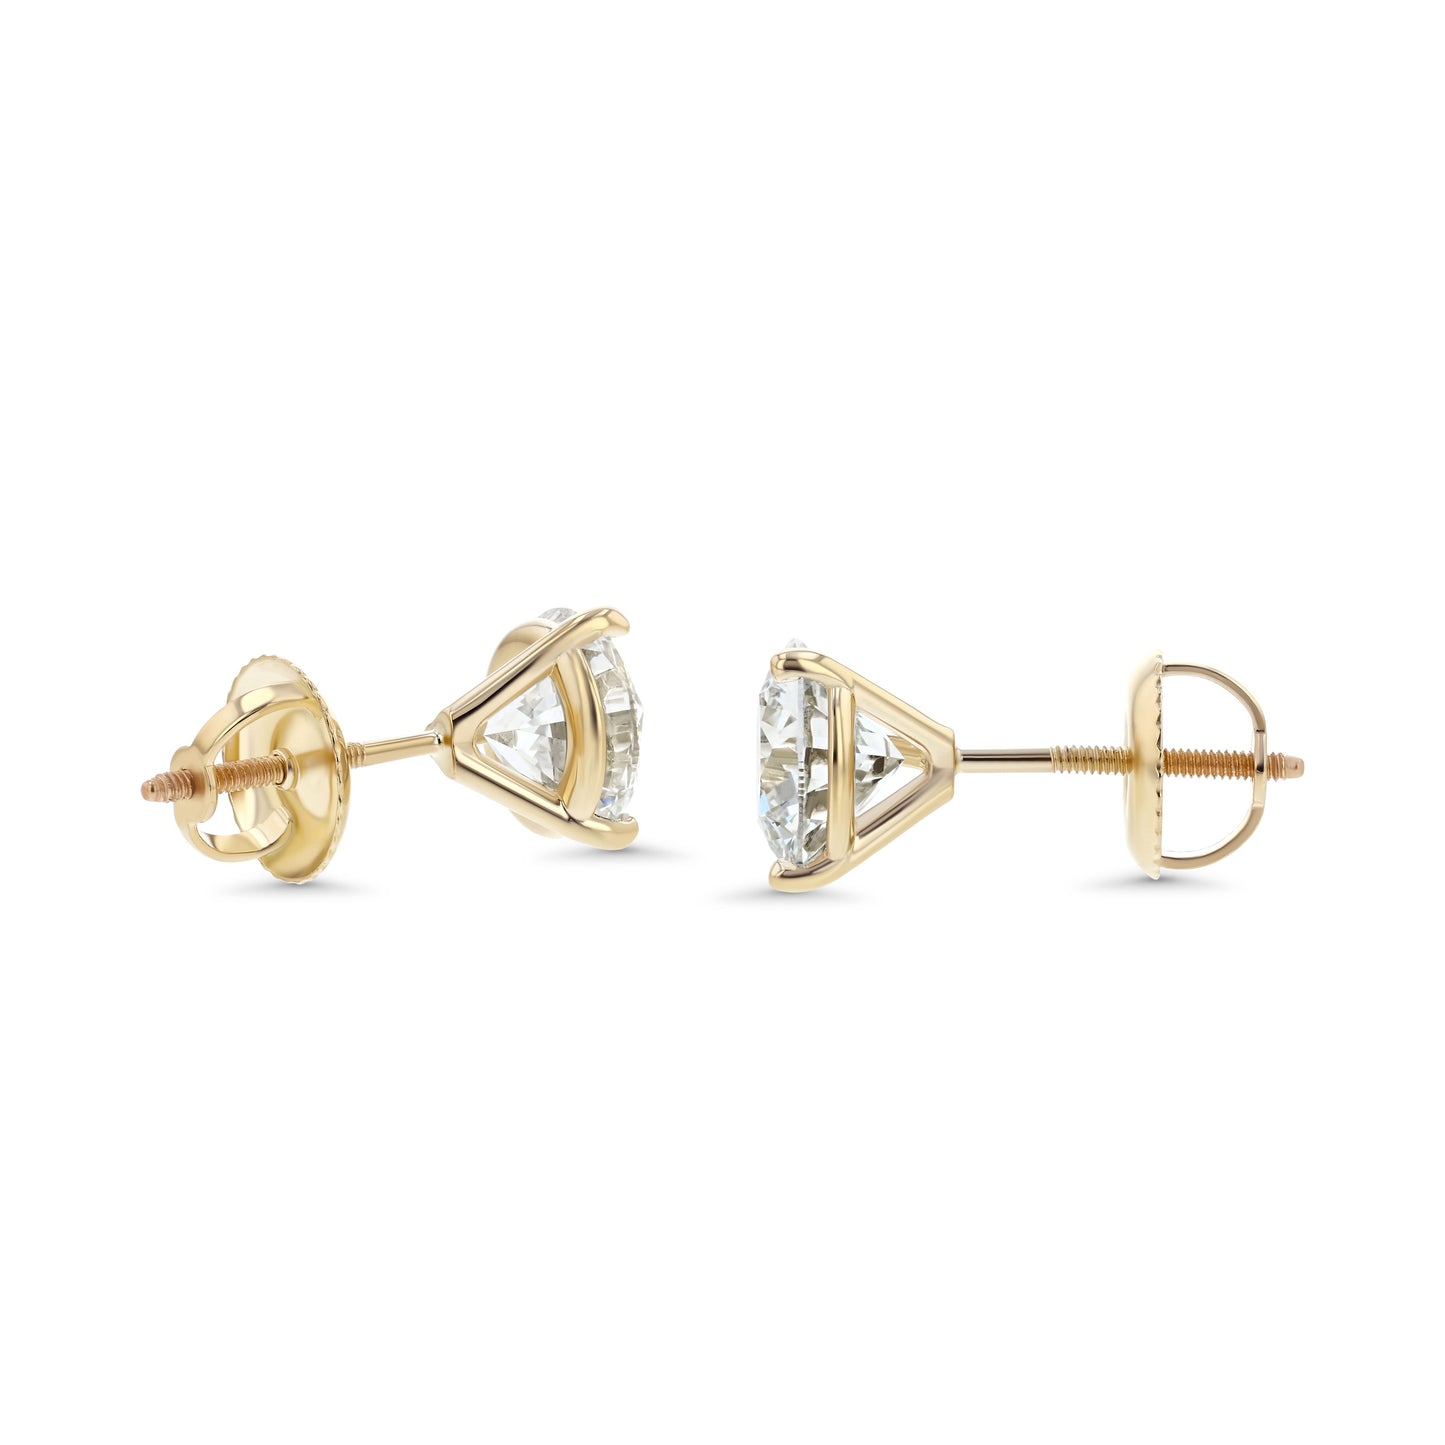 18k Yellow Gold 3-prong Martini Round Diamond Stud Earrings 1ctw (5.0mm Ea), G Color, Si3 Clarity